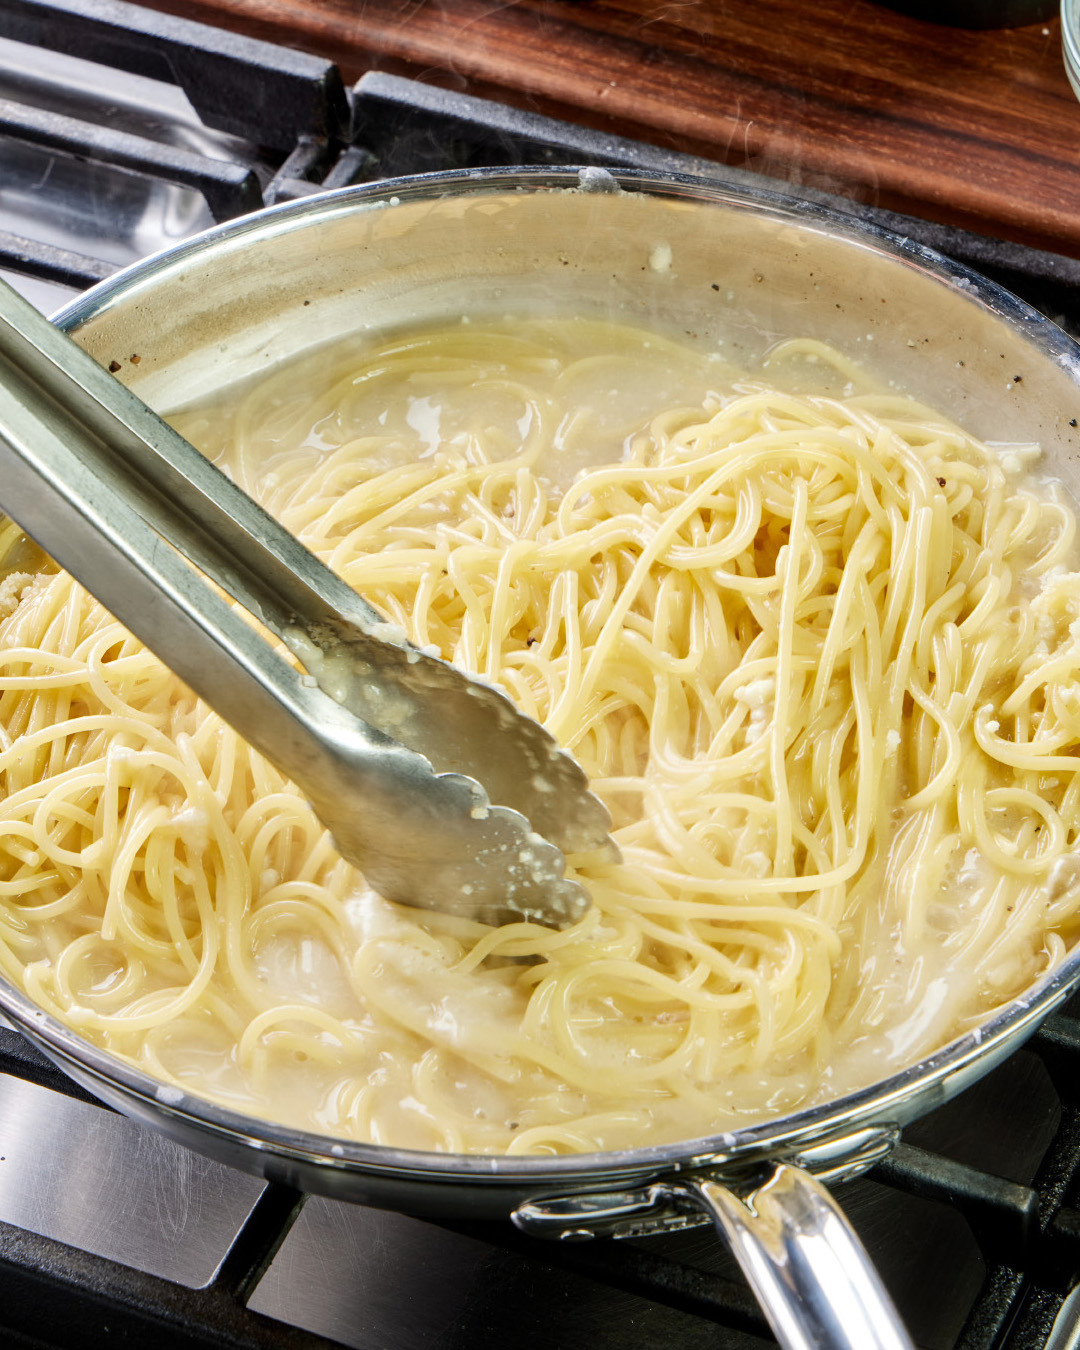 7. While still on medium-high, continue tossing the spaghetti until al dente and lightly sauced, with about ¼ cup of creamy sauce pooled in the skillet.